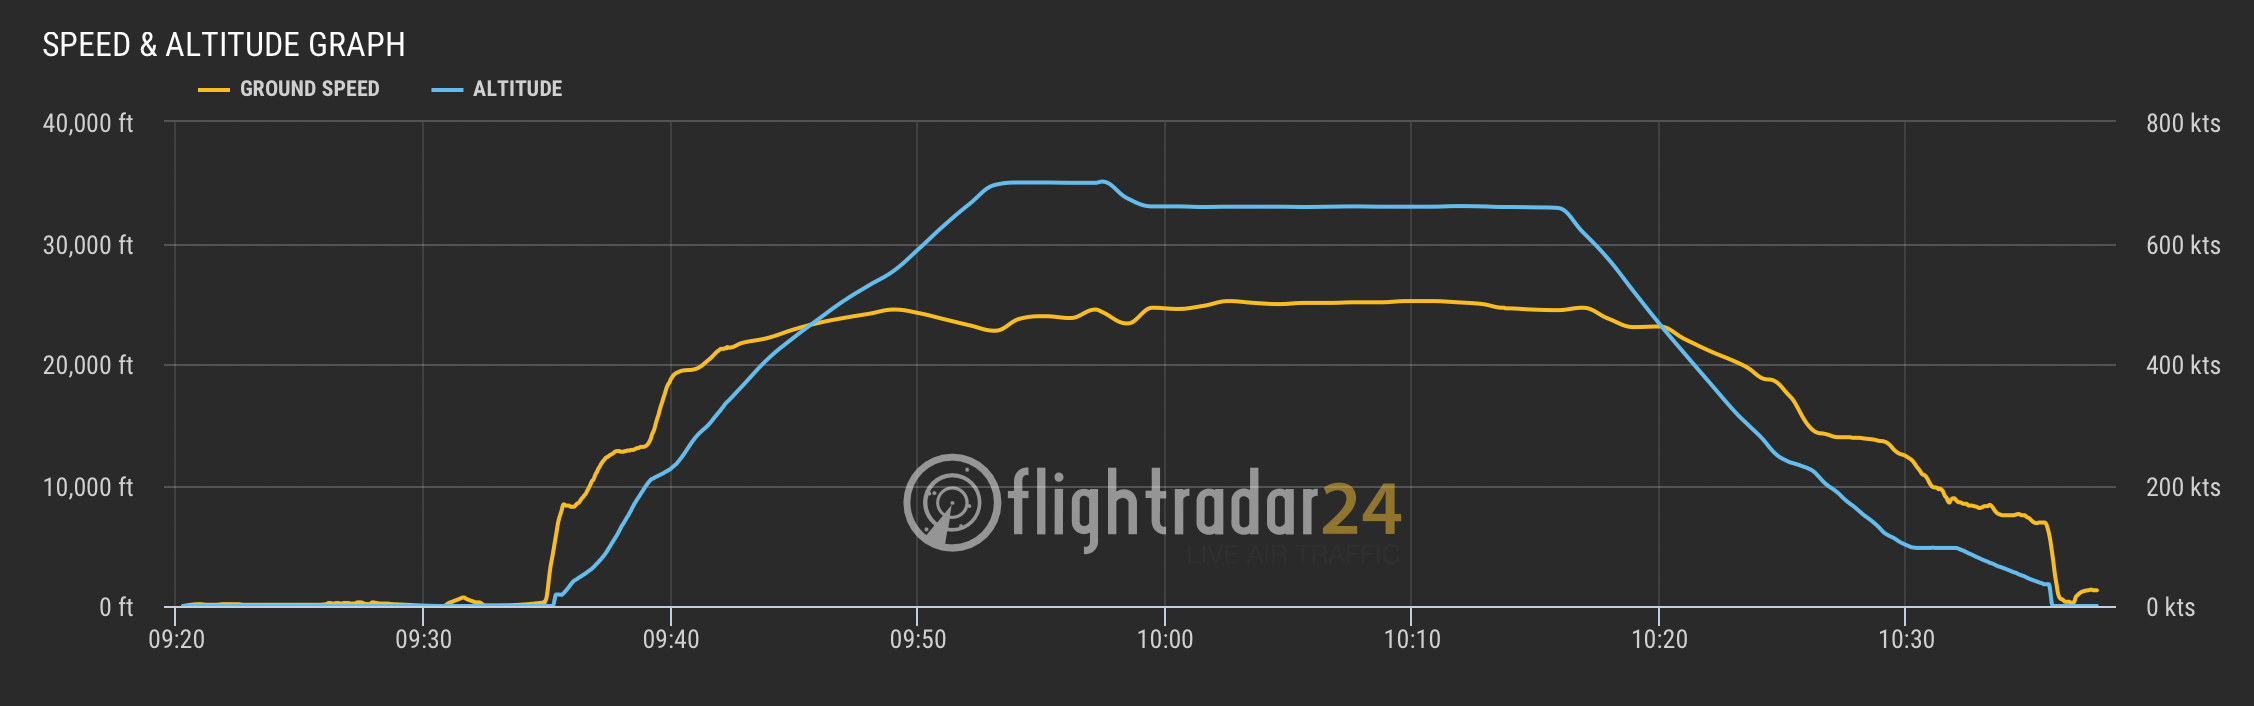 speed and altitude graph